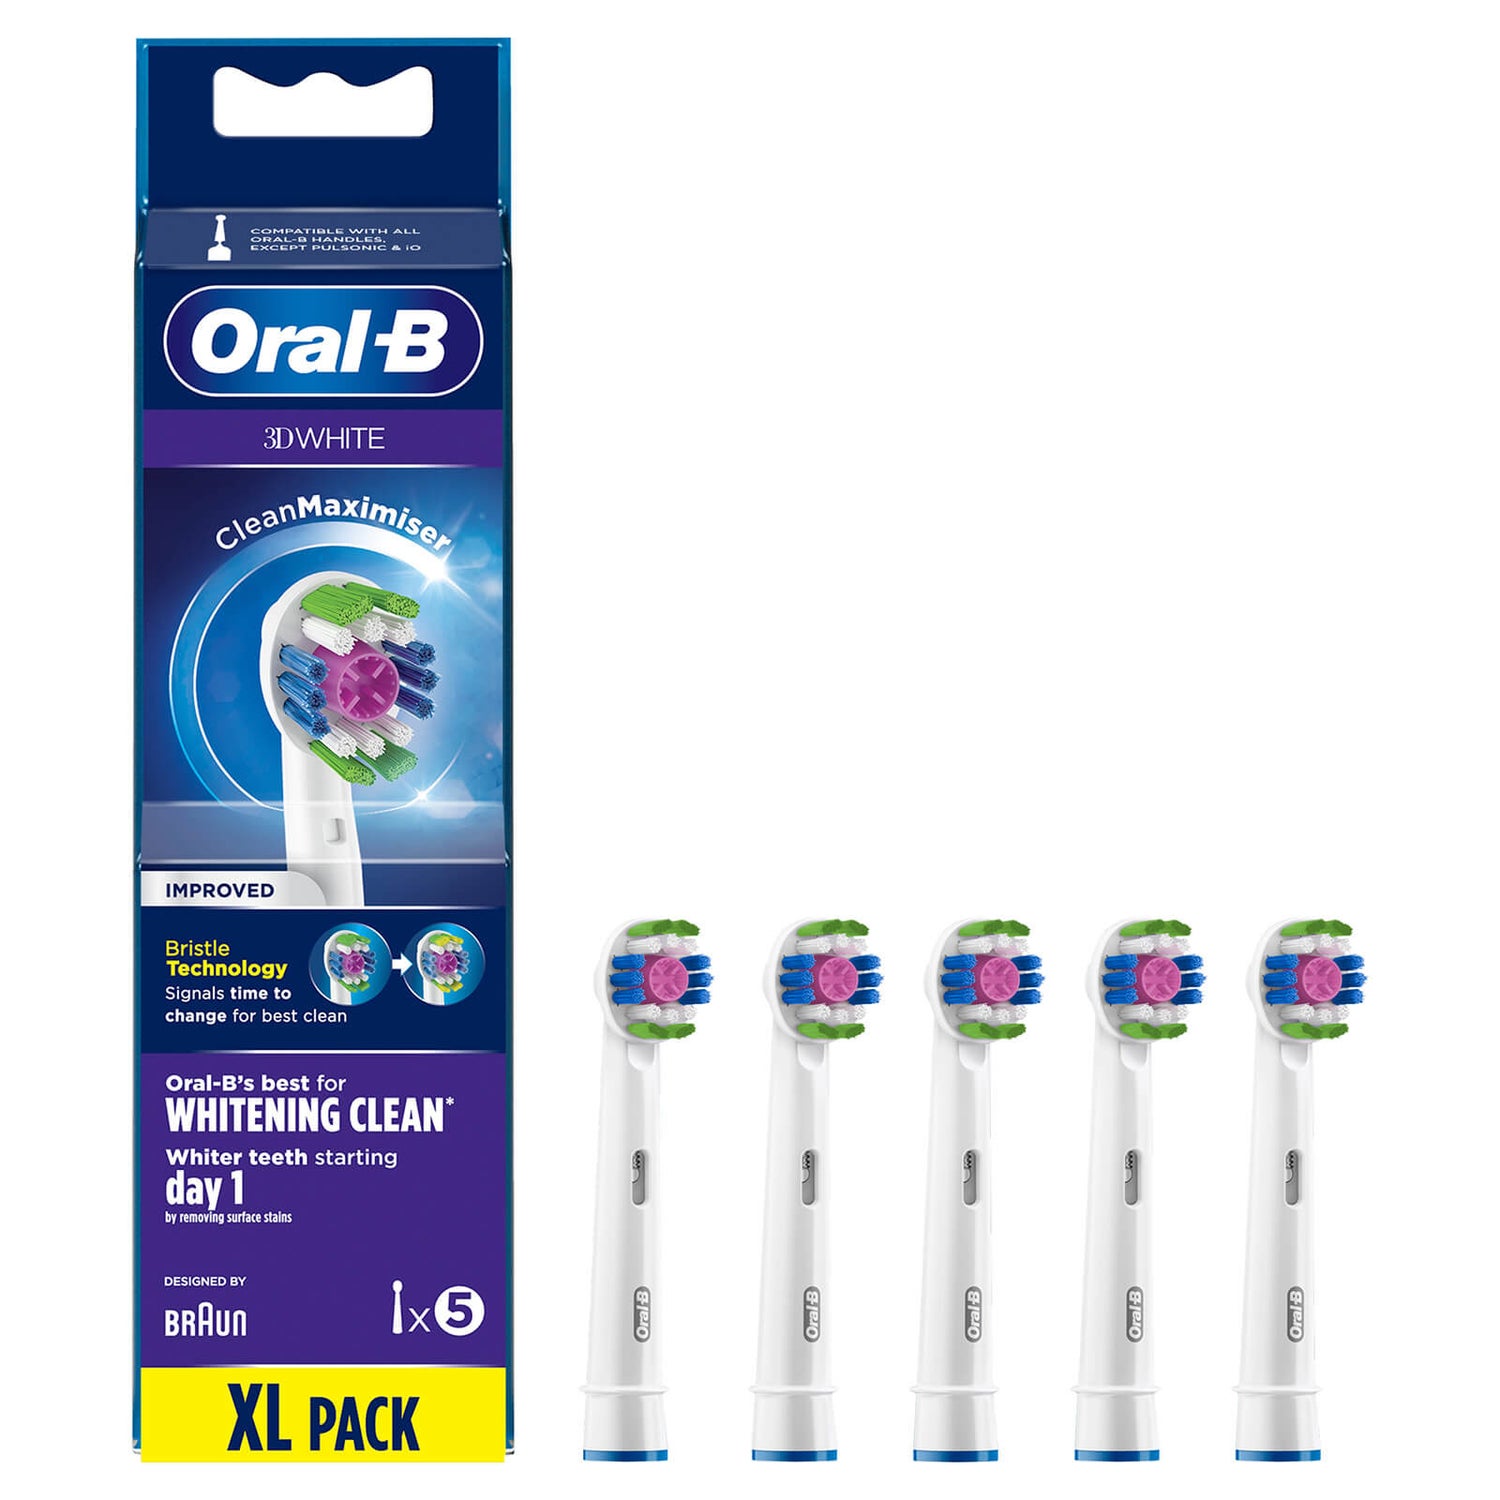 Oral B 3D White Brush Head with Clean Maximiser - 5 Counts